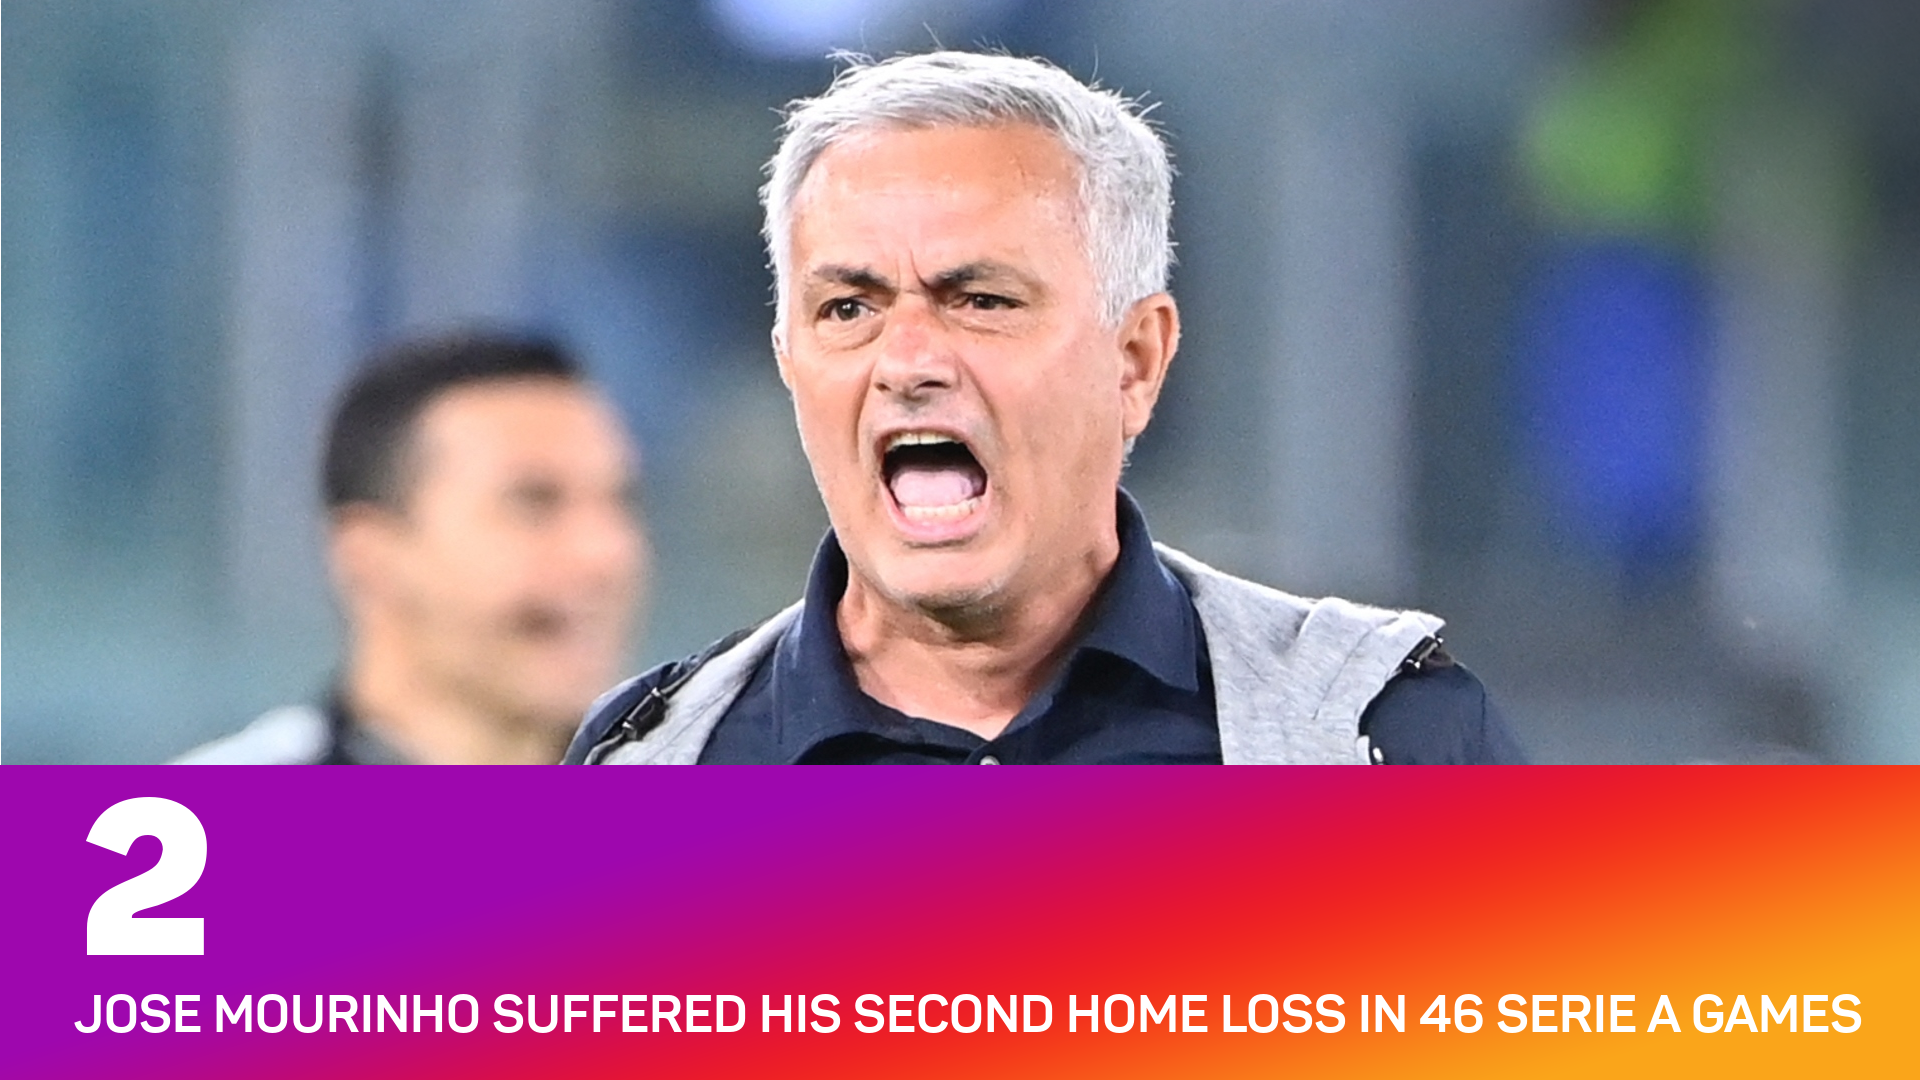 Jose Mourinho lost for the second time in 46 home Serie A matches